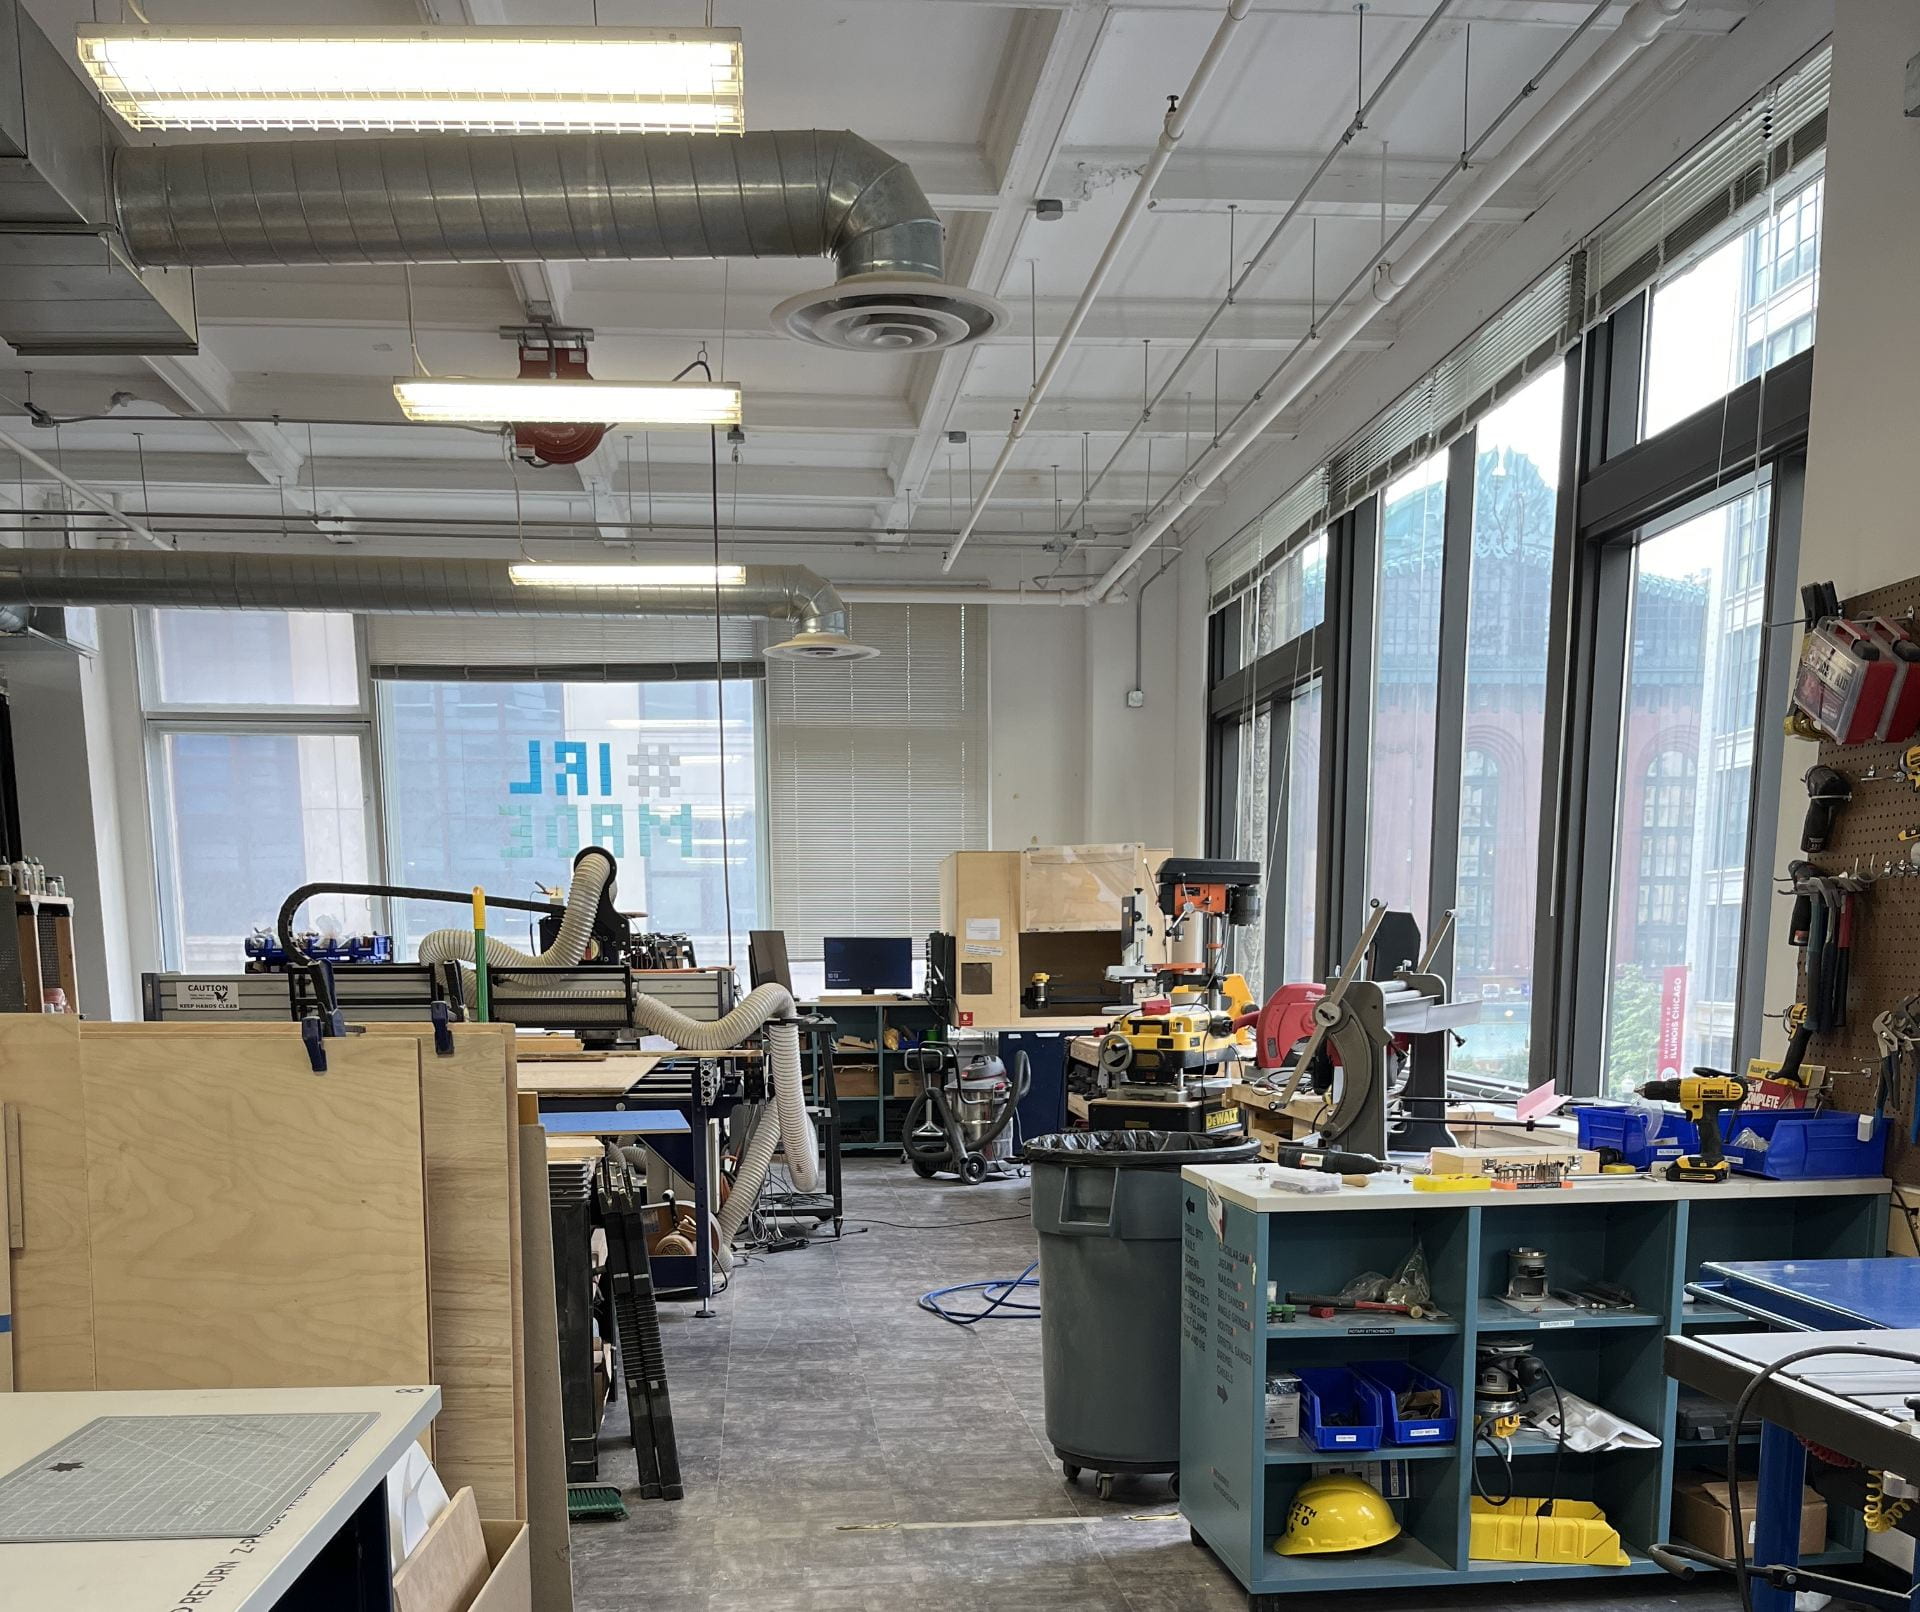 A big room with lots of woodworking tools, benches, and pieces of wood, with windows showing neighboring Chicago buildings.